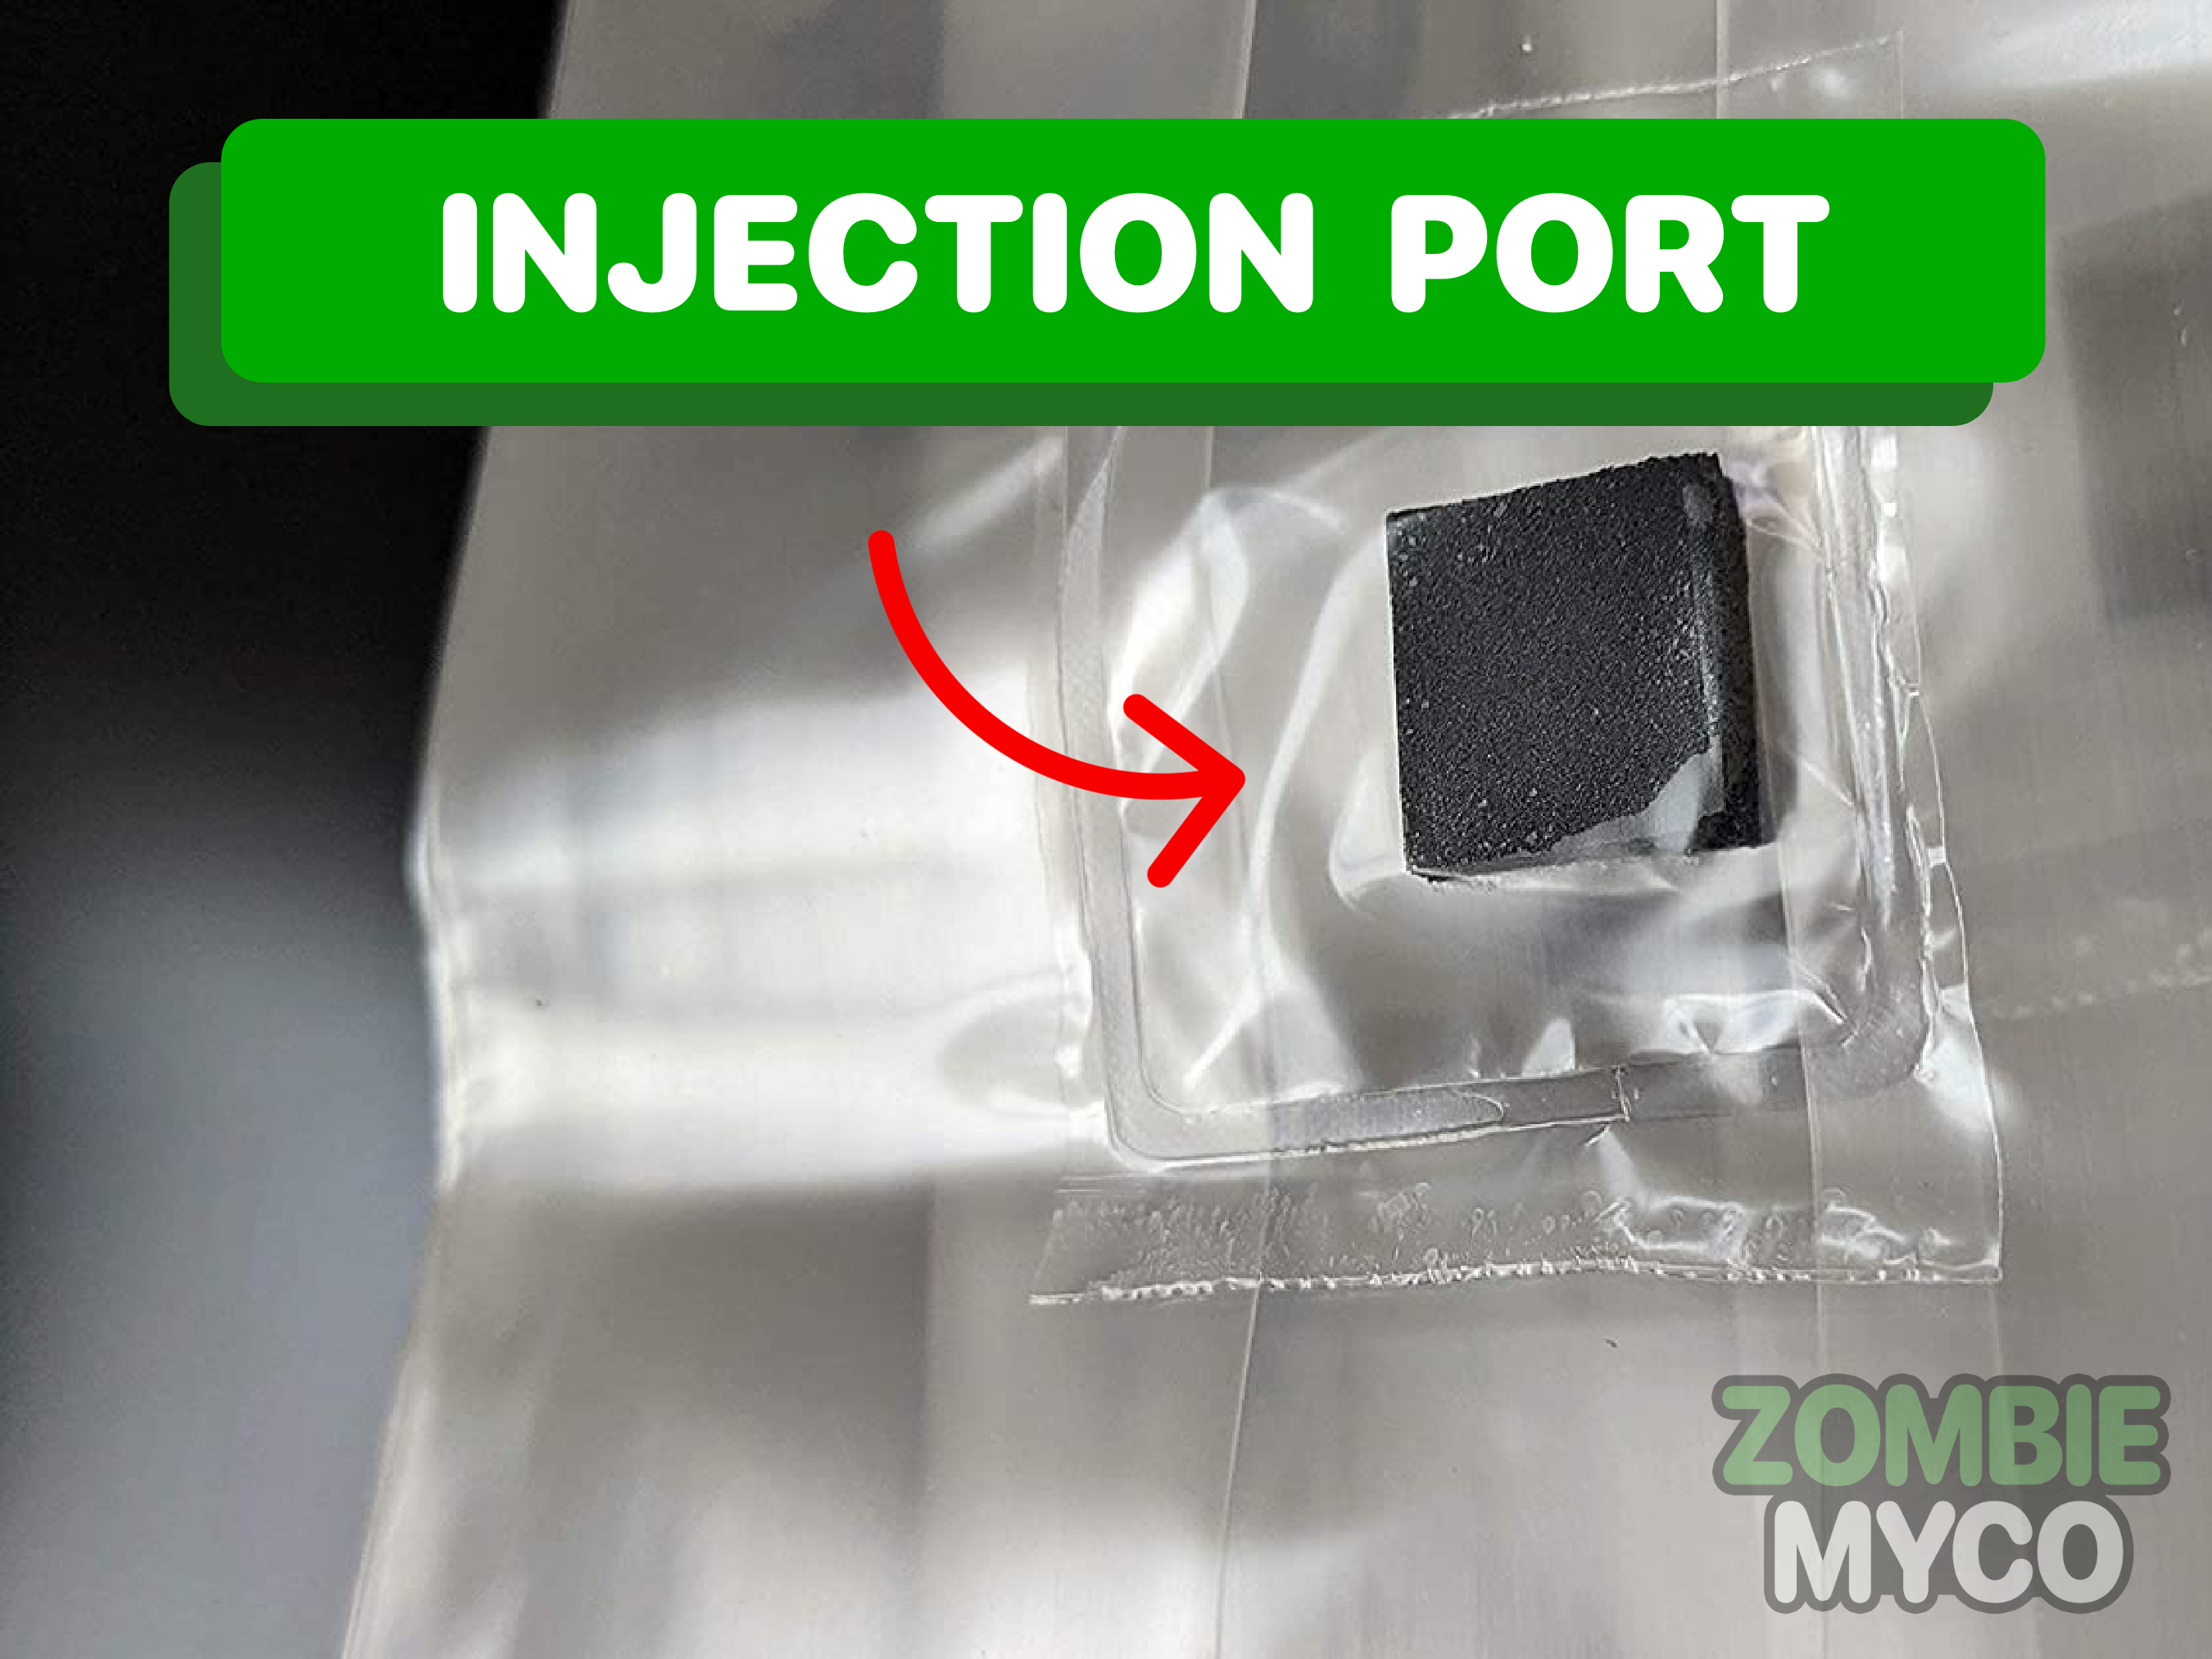 a picture showing the Injection Port